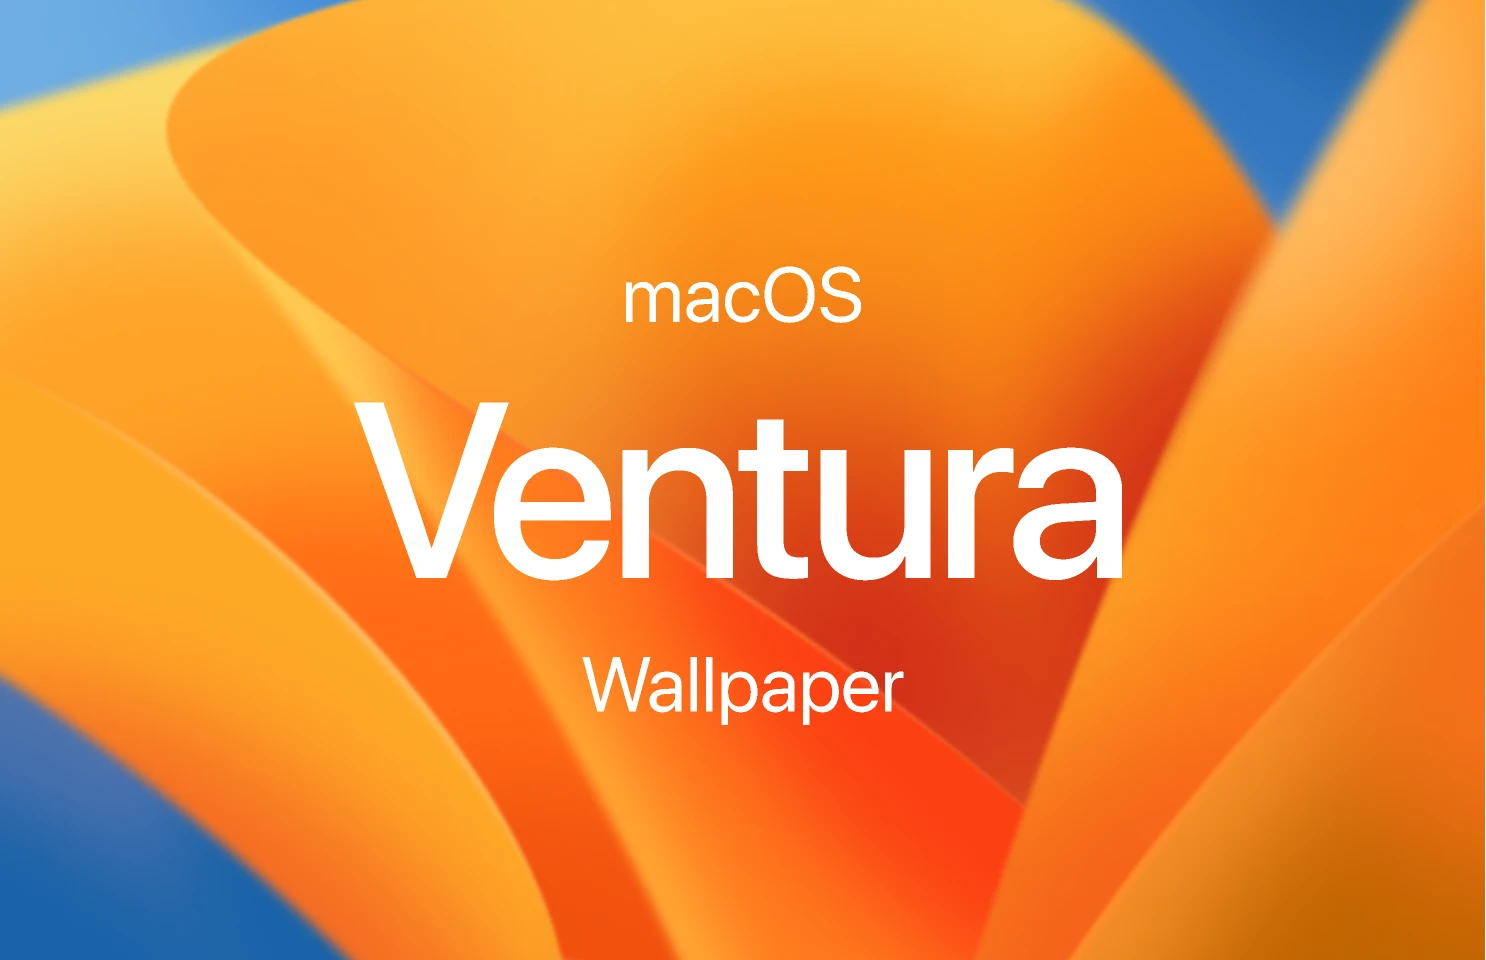 macOS Ventura Wallpaper for Figma and Adobe XD